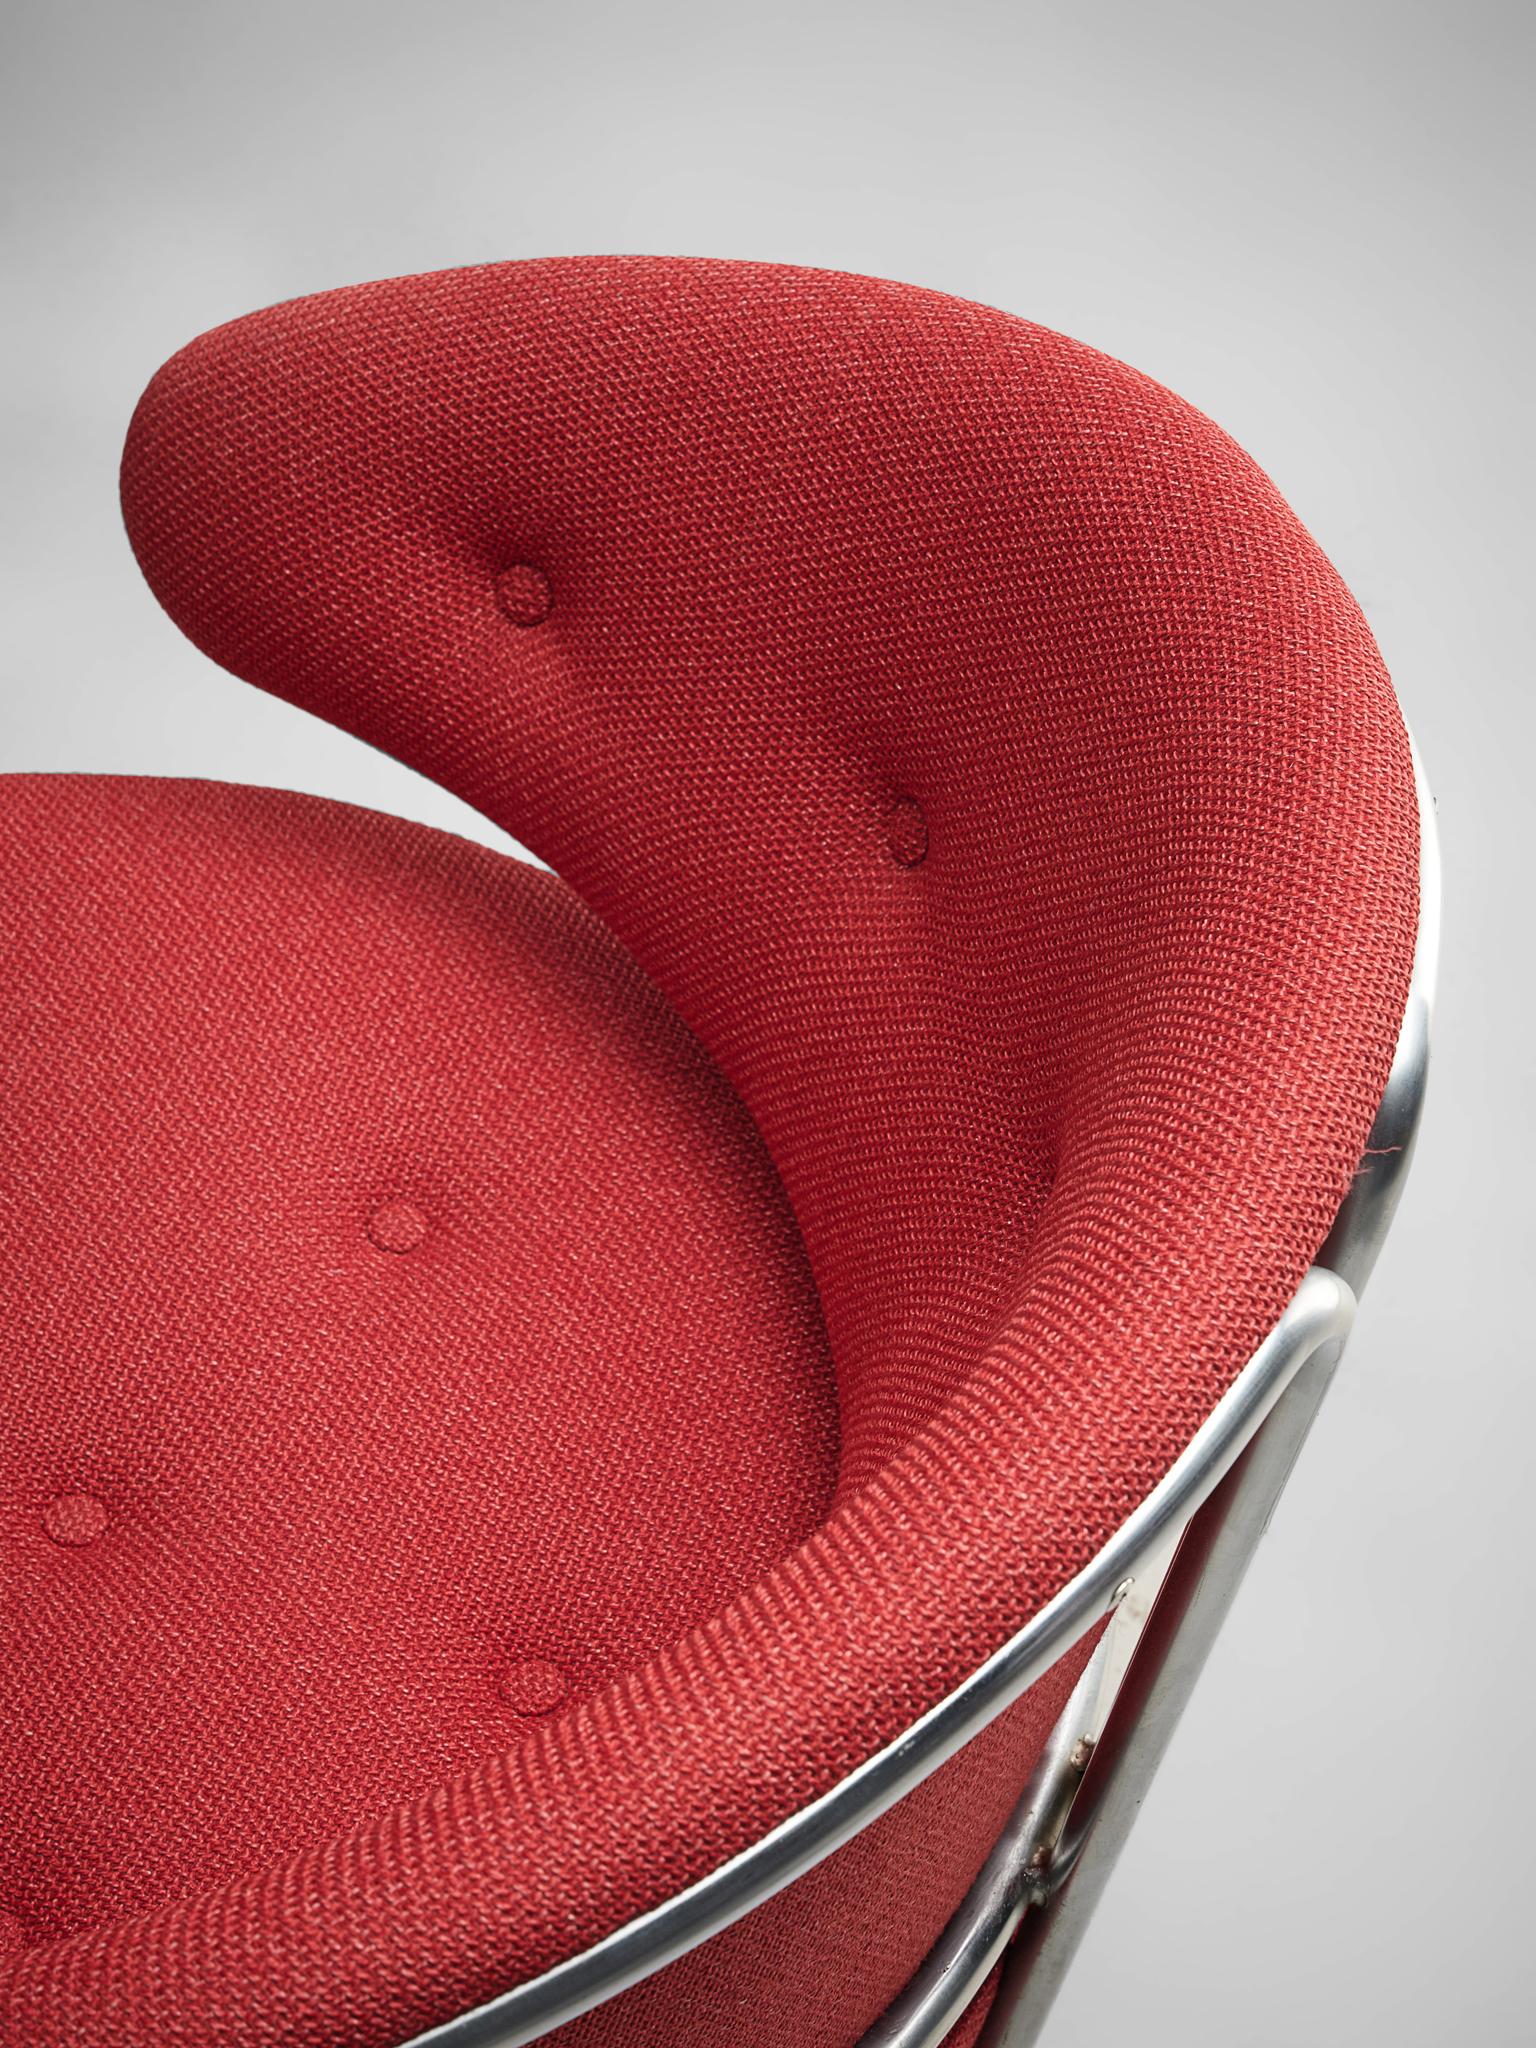 Grete Jalk Easy Chairs in Red Fabric, 1968 1